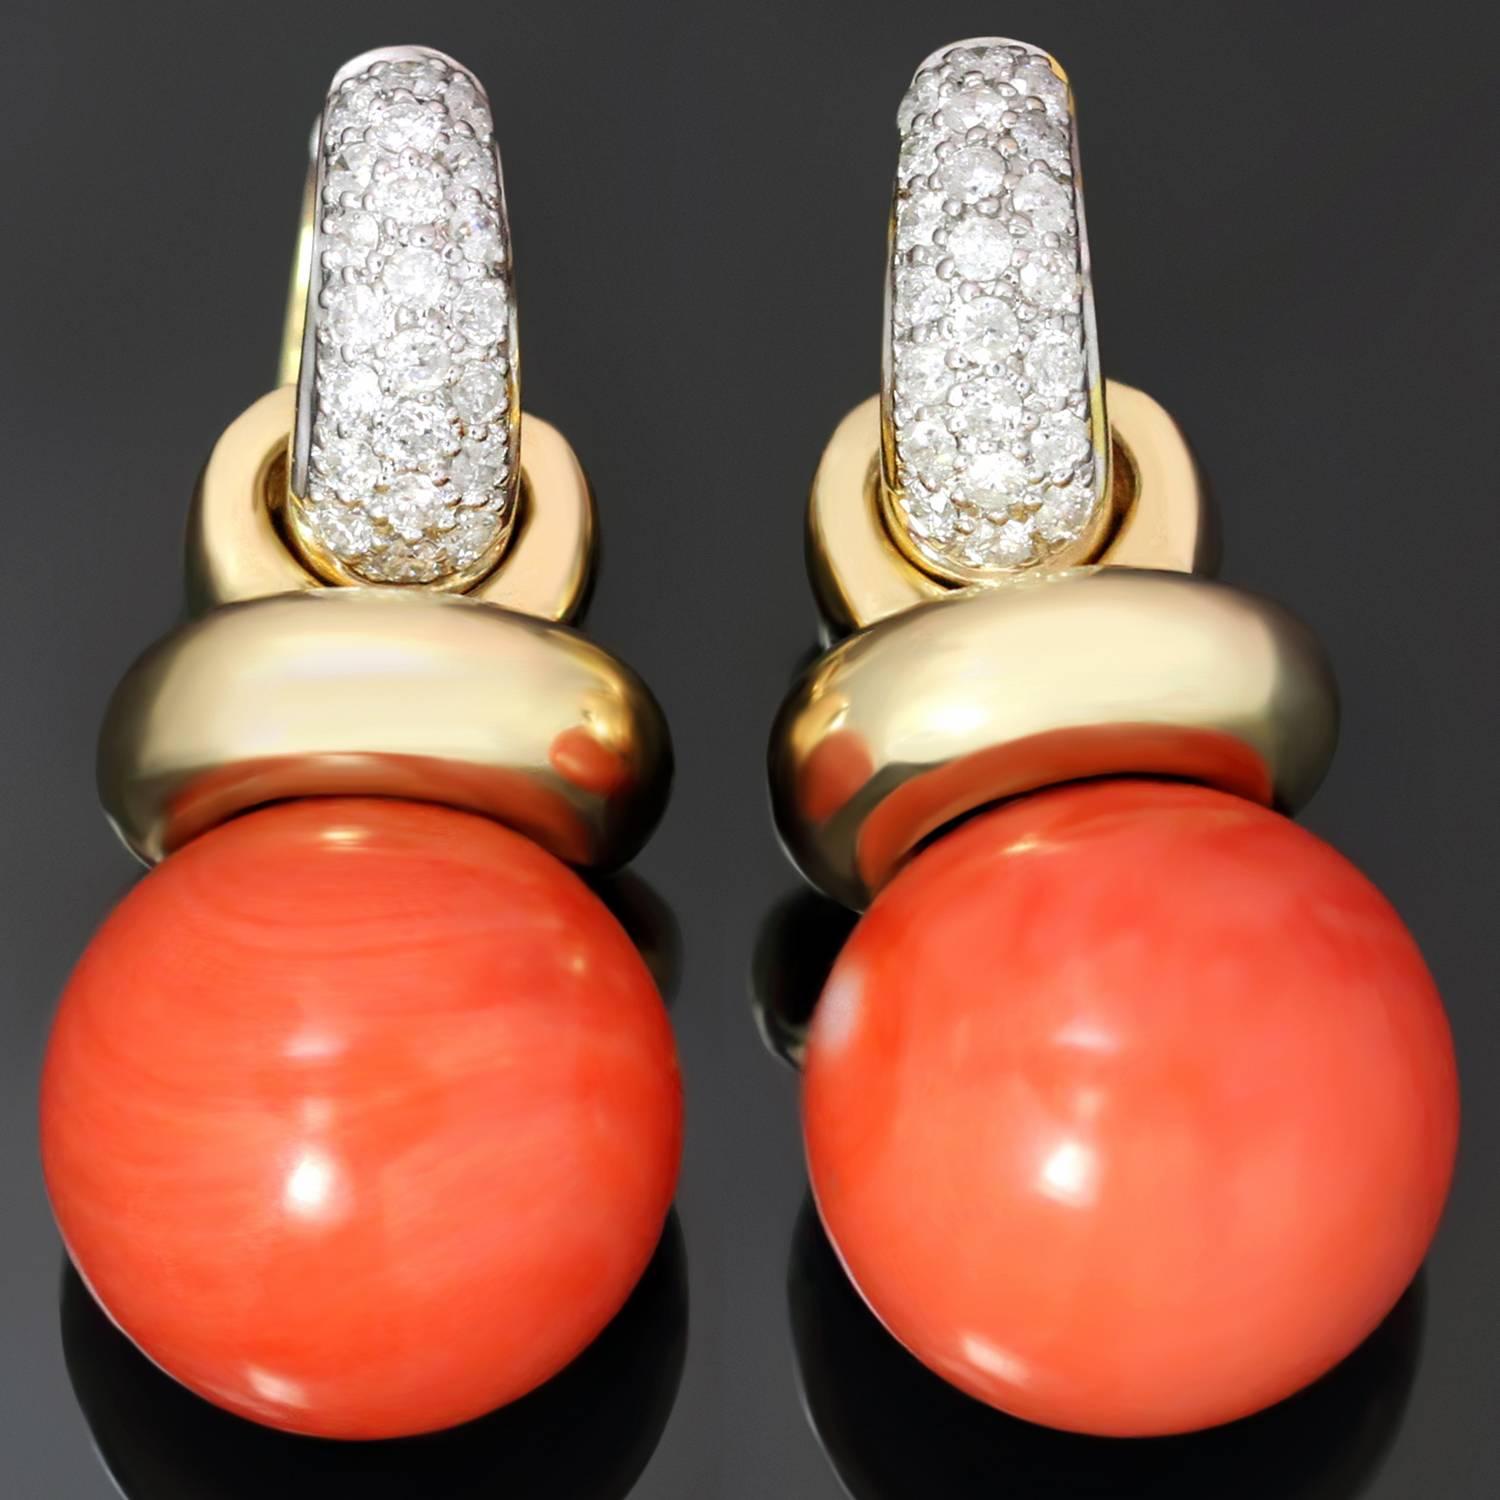 These fabulous versatile earrings feature a huggie design crafted in 14k yellow gold and set with sparkling round diamonds of an estimated 0.76 carats and completed with detached 18k yellow gold drops set with 13.5-14.0mm coral bead charms. Made in